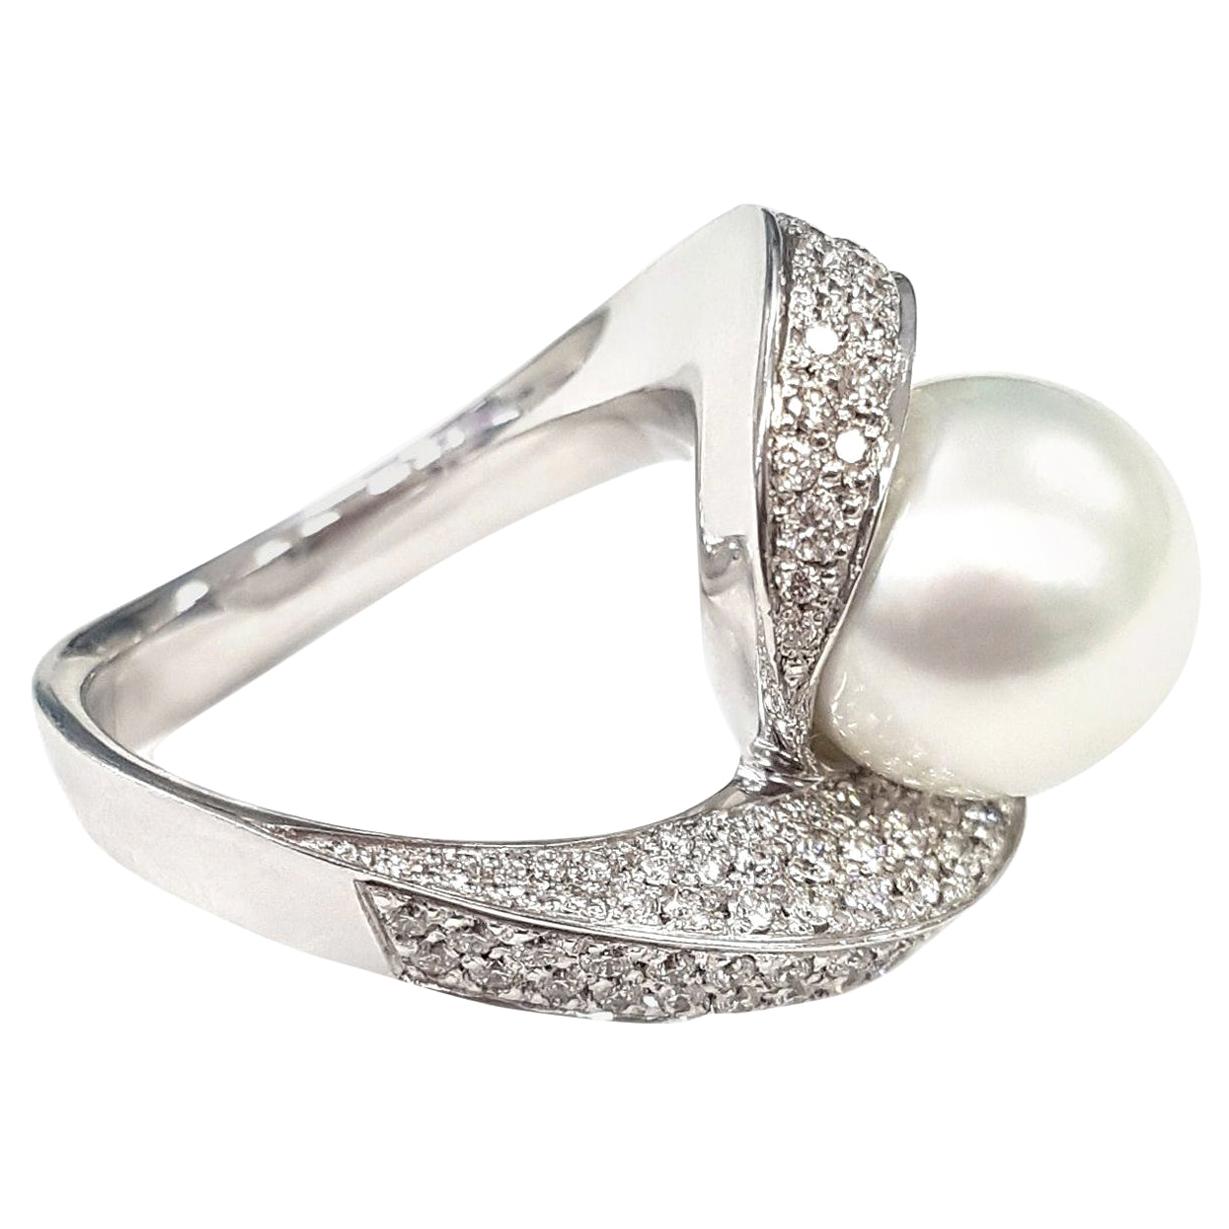 Contemporary 21st Century 18 Karat White Gold Pearl and Diamond Cocktail Ring with a Twist For Sale